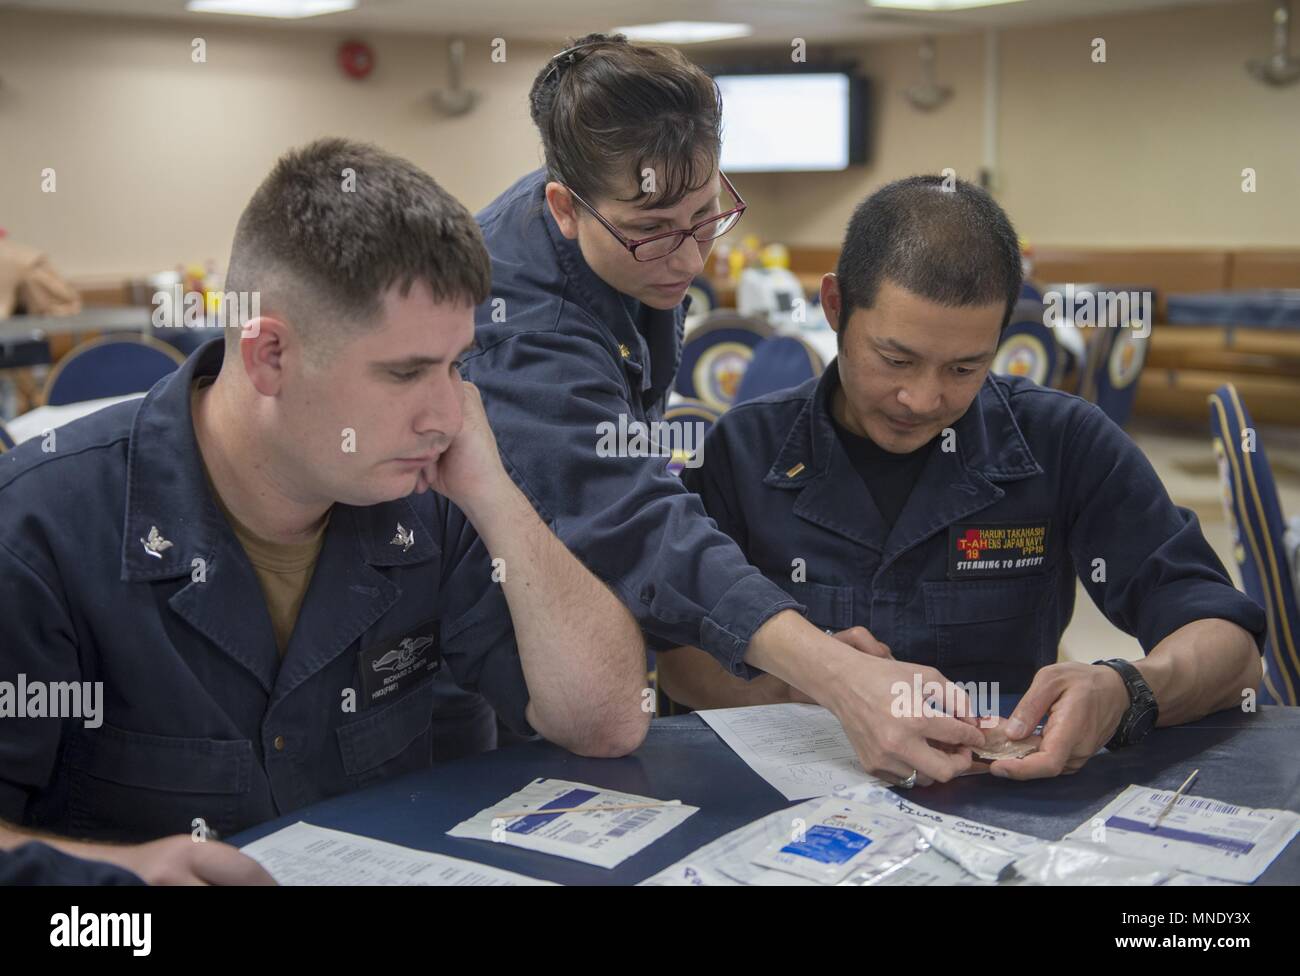 180514-N-MD713-0042 PACIFIC OCEAN (May 14, 2018) U.S. and Japanese Sailors learn about wound assessments and proper wound dressing techniques during a skin and wound care course aboard Military Sealift Command hospital ship USNS Mercy (T-AH 19) in support of upcoming Pacific Partnership 2018 (PP18) missions, May 14, 2018. PP18's mission is to work collectively with host and partner nations to enhance regional interoperability and disaster response capabilities, increase stability and security in the region, and foster new and enduring friendships across the Indo-Pacific Region. Pacific Partner Stock Photo